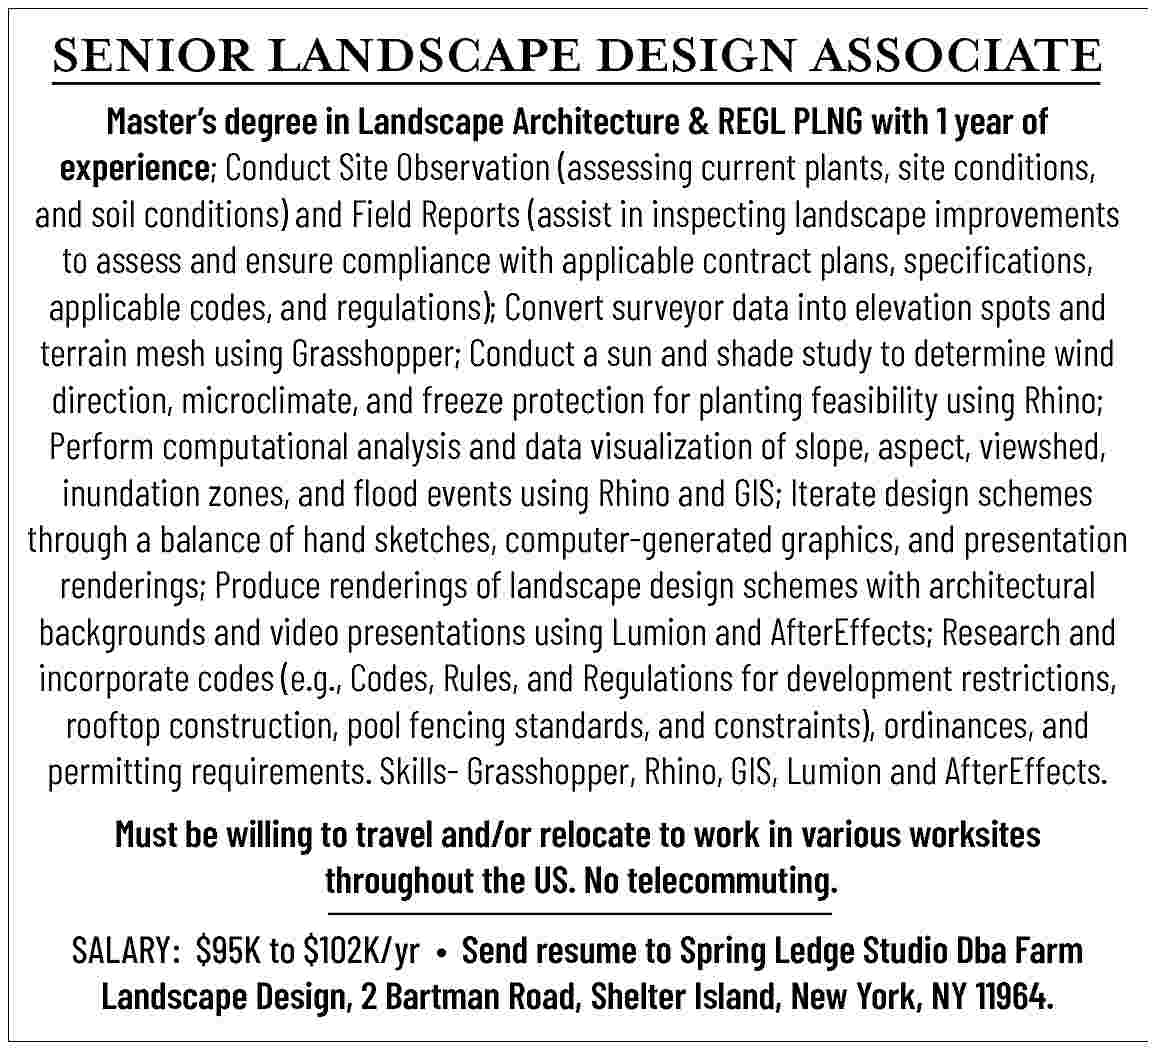 SENIOR LANDSCAPE   DESIGN  SENIOR LANDSCAPE   DESIGN ASSOCIATE    Master   s degree in Landscape Architecture & REGL PLNG with 1 year of  experience;  Conduct Site Observation (assessing current plants, site conditions,  and soil conditions) and Field Reports (assist in inspecting landscape improvements  to assess and ensure compliance with applicable contract plans, specifications,  applicable codes, and regulations); Convert surveyor data into elevation spots and  terrain mesh using Grasshopper; Conduct a sun and shade study to determine wind  direction, microclimate, and freeze protection for planting feasibility using Rhino;  Perform computational analysis and data visualization of slope, aspect, viewshed,  inundation zones, and flood events using Rhino and GIS; Iterate design schemes  through a balance of hand sketches, computer-generated graphics, and presentation  renderings; Produce renderings of landscape design schemes with architectural  backgrounds and video presentations using Lumion and AfterEffects; Research and  incorporate codes (e.g., Codes, Rules, and Regulations for development restrictions,  rooftop construction, pool fencing standards, and constraints), ordinances, and  permitting requirements. Skills- Grasshopper, Rhino, GIS, Lumion and AfterEffects.    Must be willing to travel and/or relocate to work in various worksites  throughout the US. No telecommuting.    SALARY:    $95K to $102K/yr     Send resume to Spring Ledge Studio Dba Farm  Landscape Design, 2 Bartman Road, Shelter Island, New York, NY 11964.     